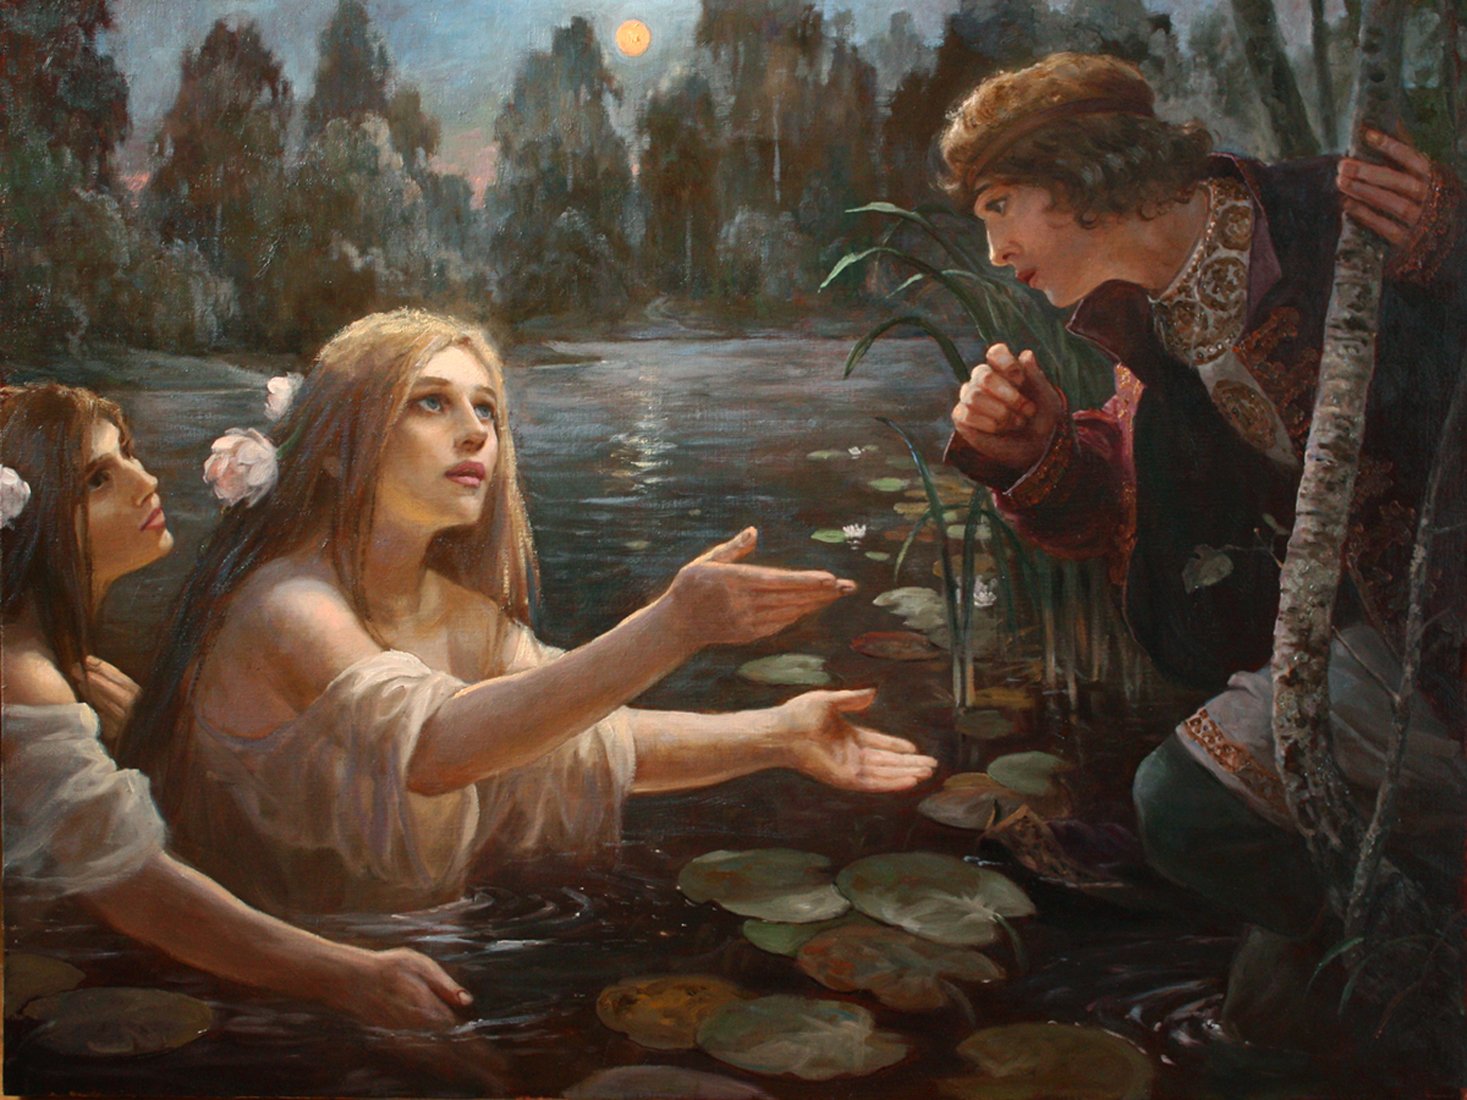 A painting of the mythological Rusalkas, two young women in the water drawing a young man in.